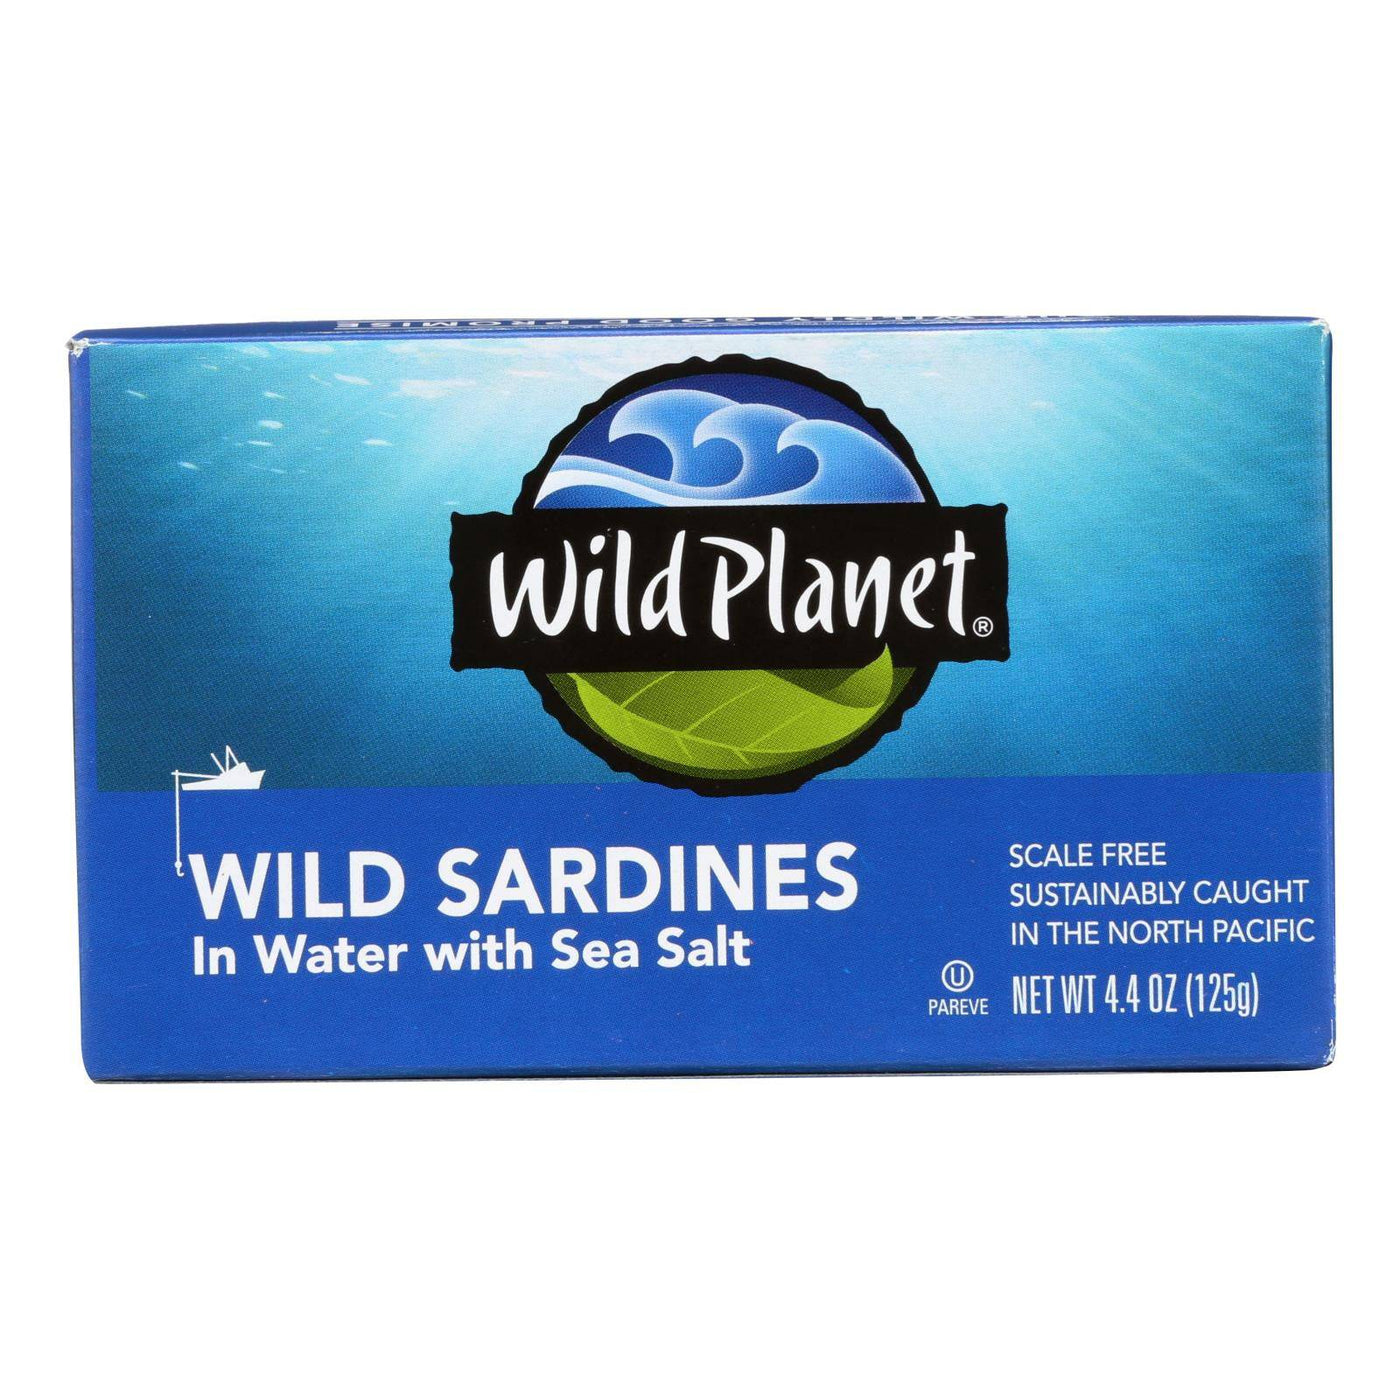 Buy Wild Planet Wild Sardines In Spring Water - Case Of 12 - 4.375 Oz.  at OnlyNaturals.us